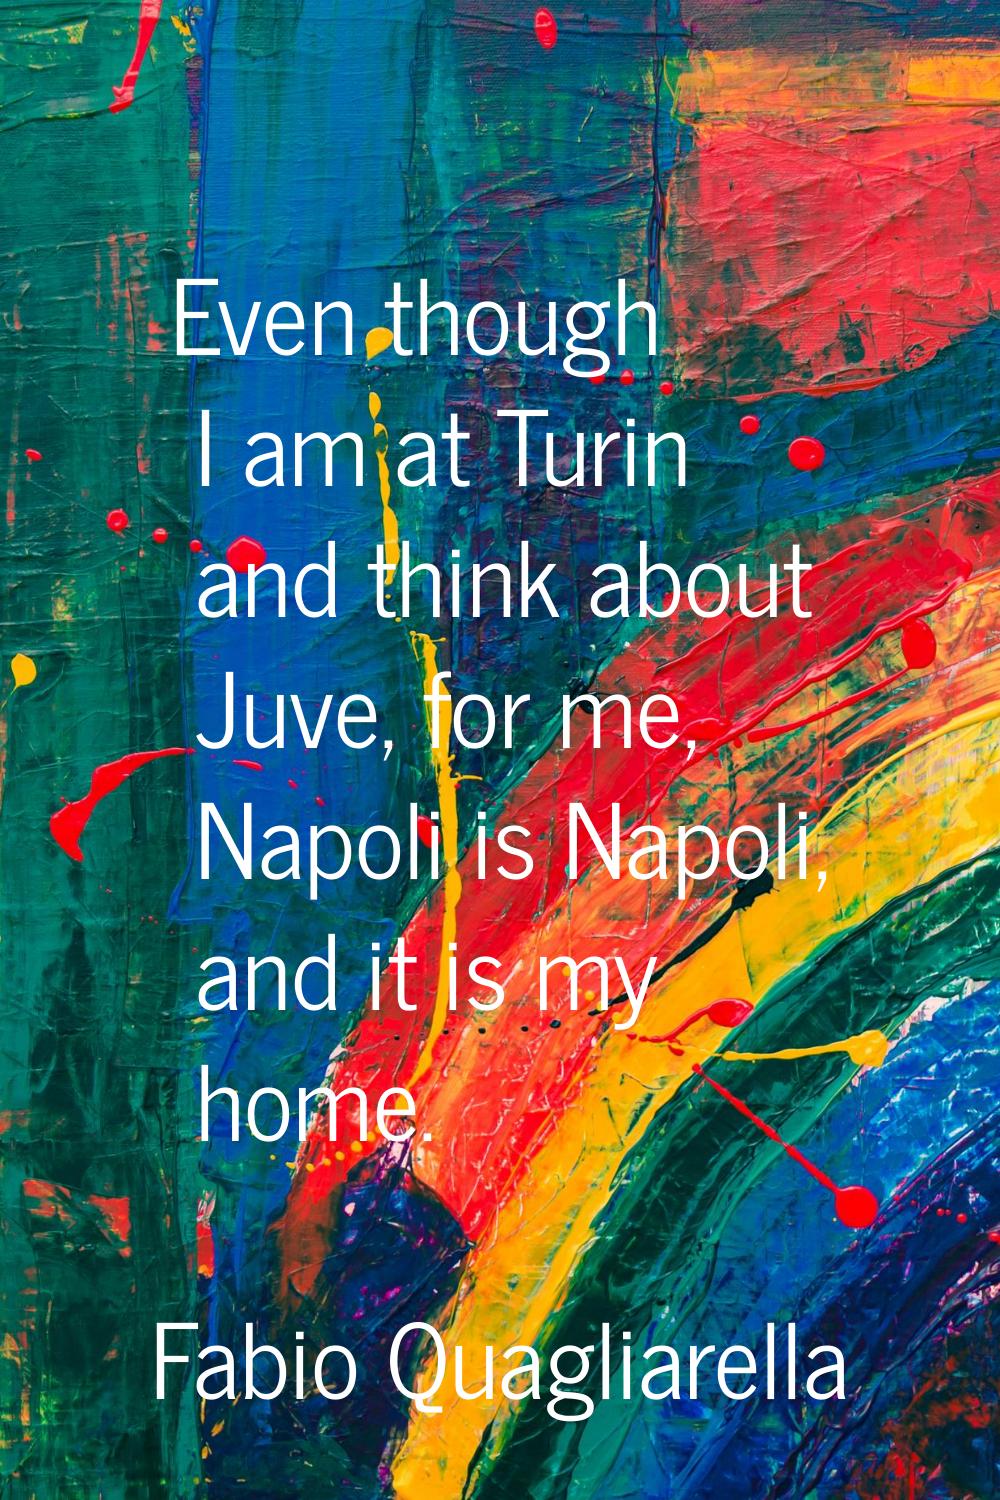 Even though I am at Turin and think about Juve, for me, Napoli is Napoli, and it is my home.